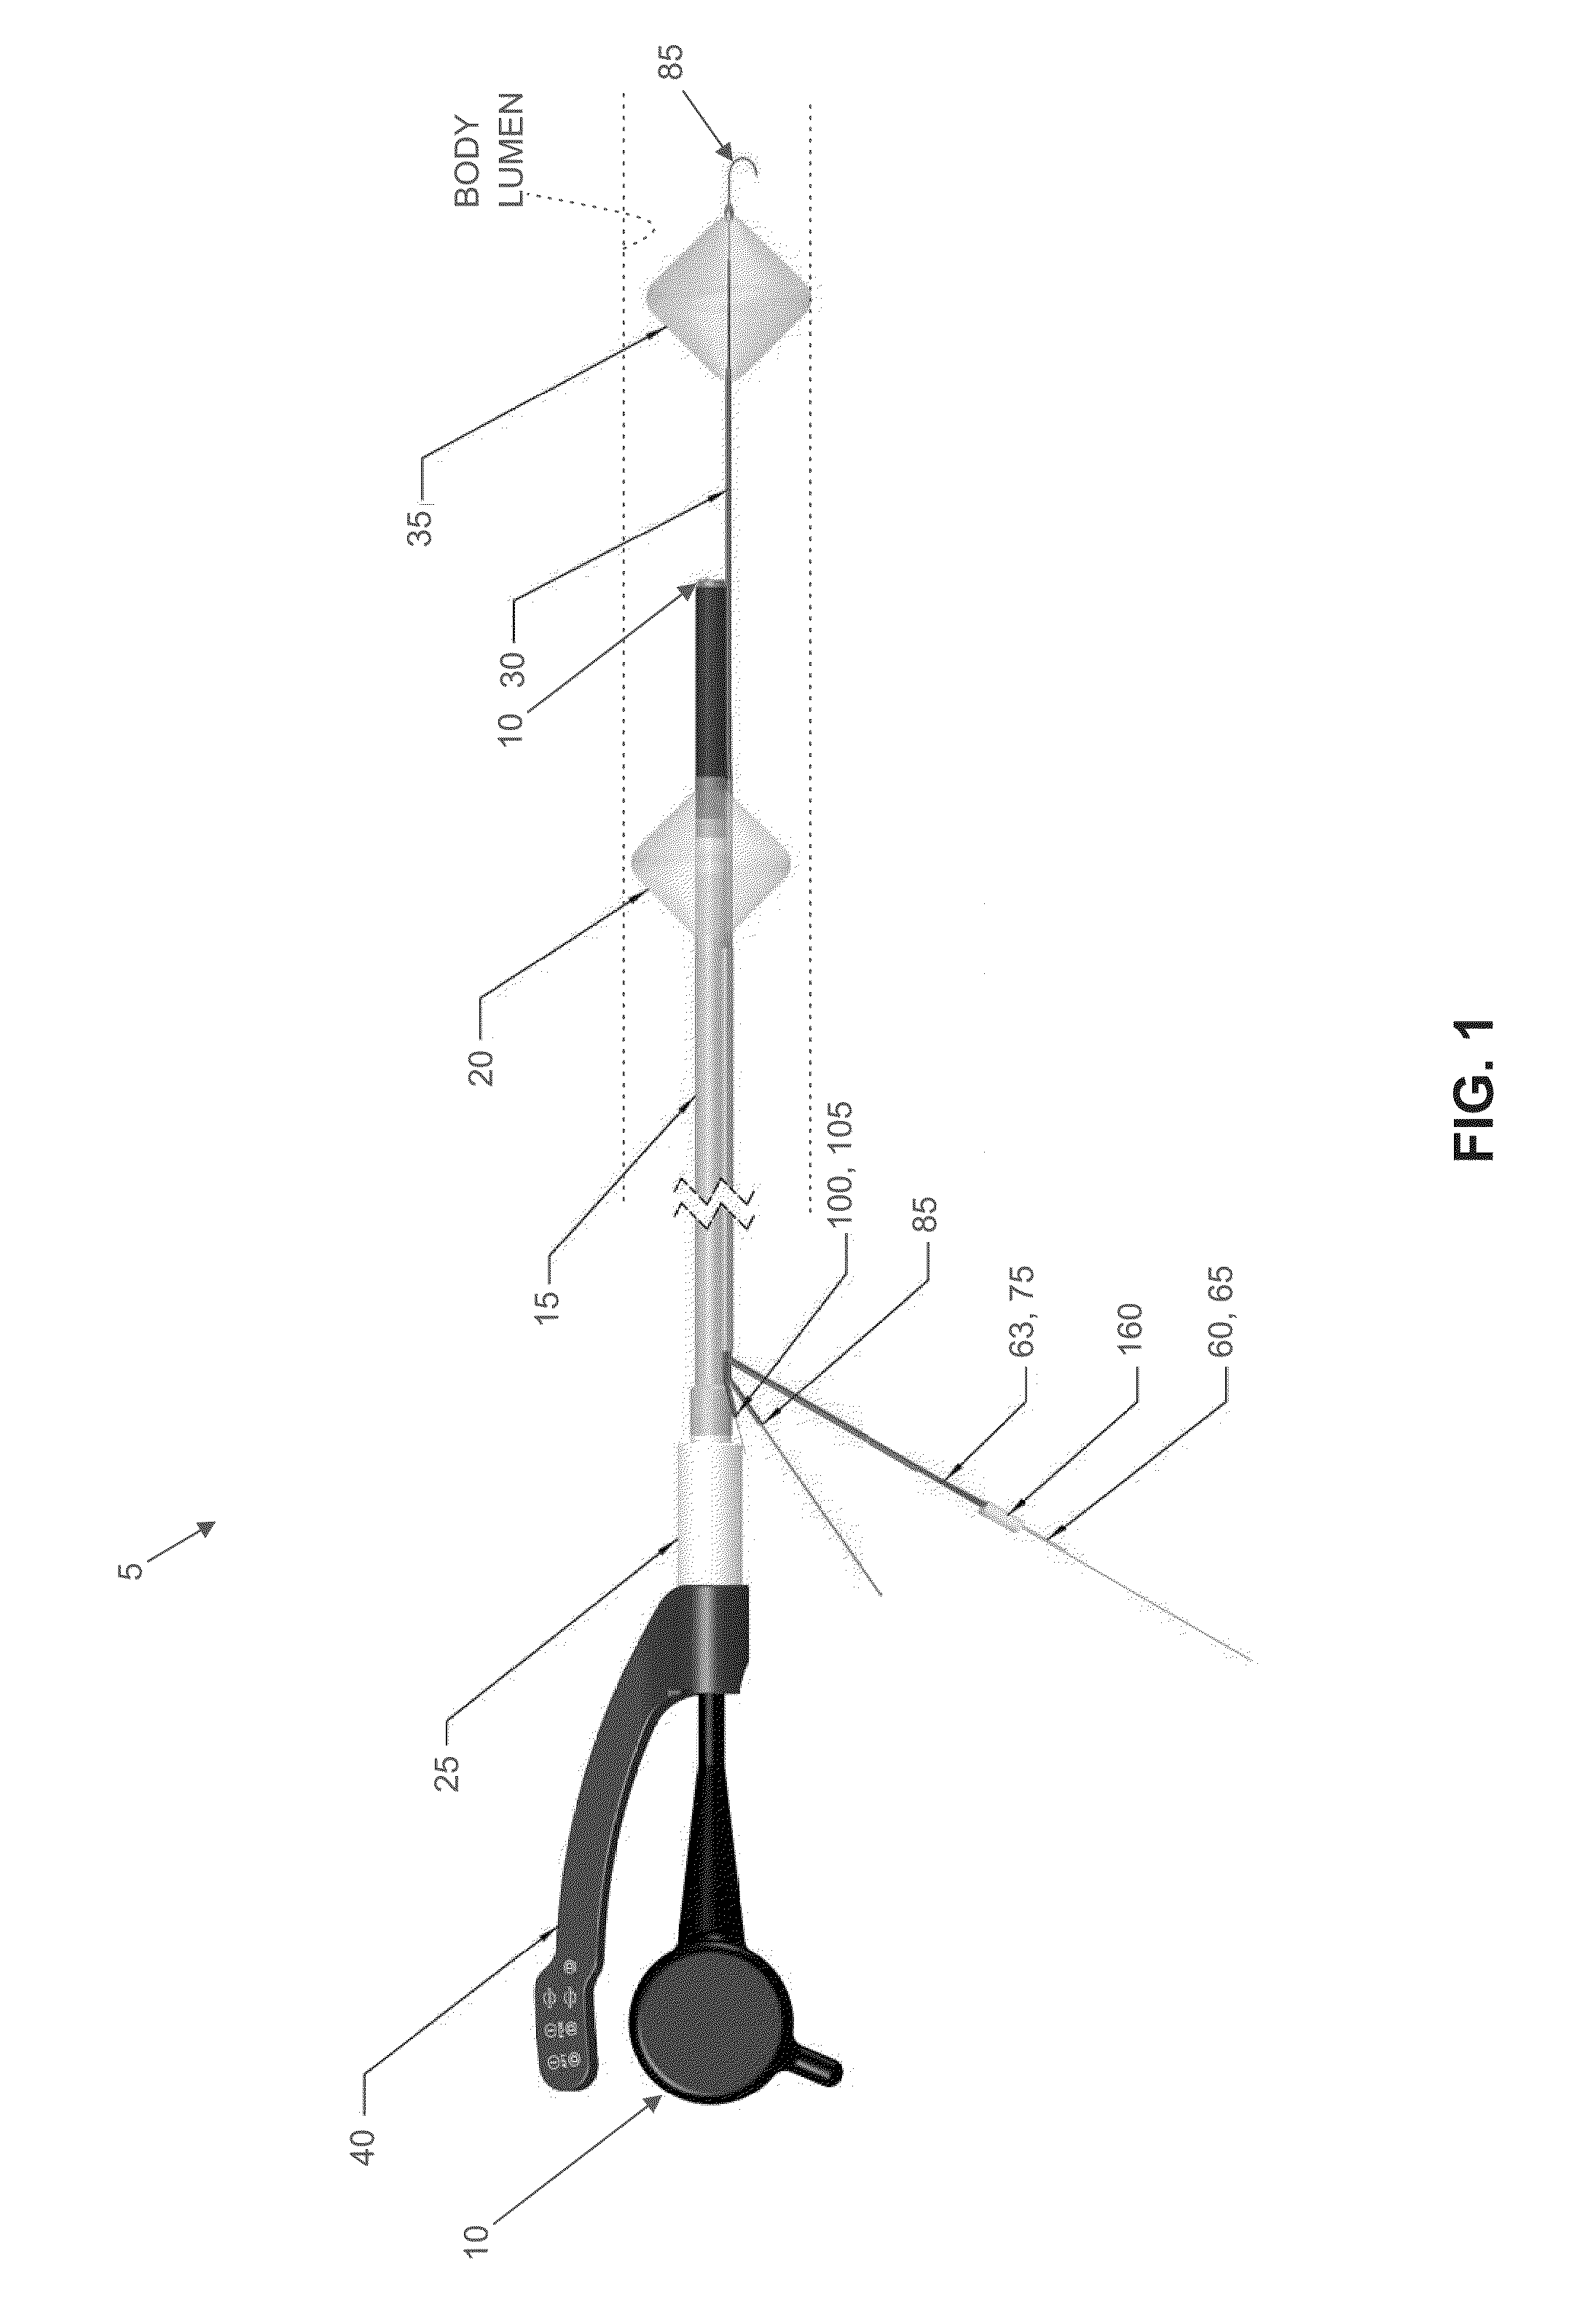 Method and apparatus for stabilizing, straightening, expanding and/or flattening the side wall of a body lumen and/or body cavity so as to provide increased visualization of the same and/or increased access to the same, and/or for stabilizing instruments relative to the same